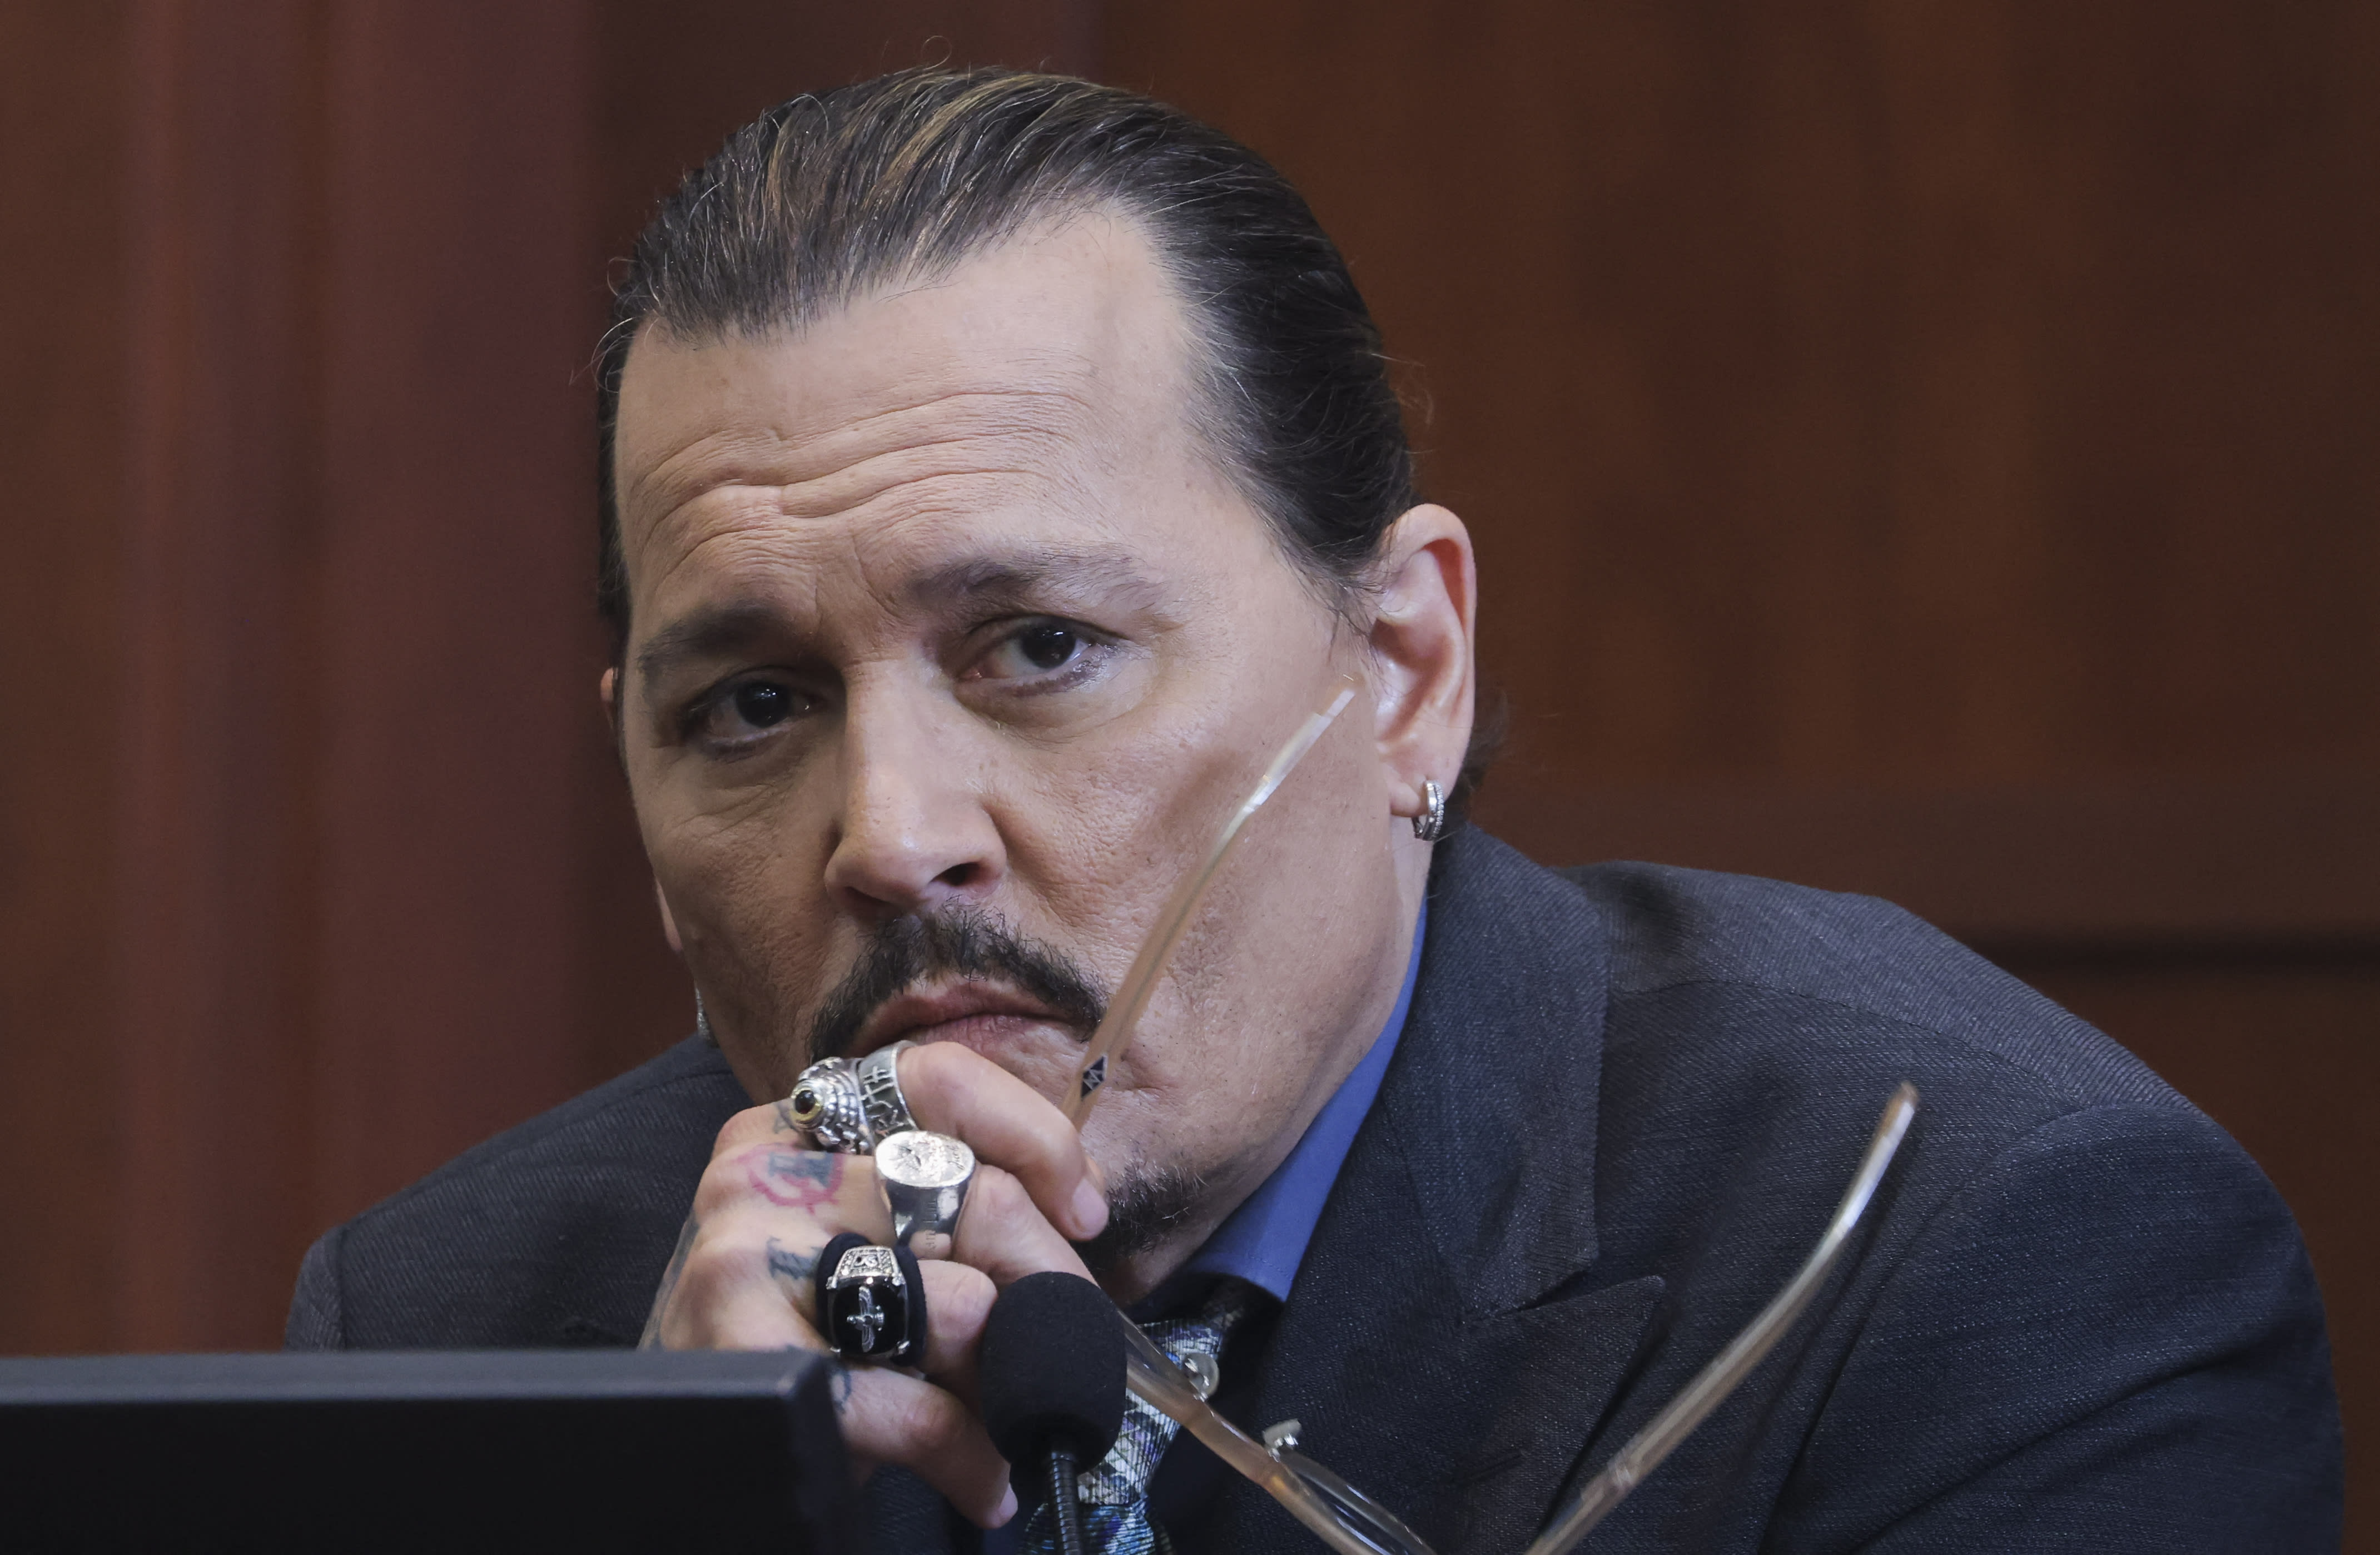 Actor Johnny Depp listens to a question as he testifies in the courtroom during his defamation trial against his ex-wife Amber Heard, at the Fairfax County Circuit Courthouse in Fairfax, Virginia, on May 25, 2022. 